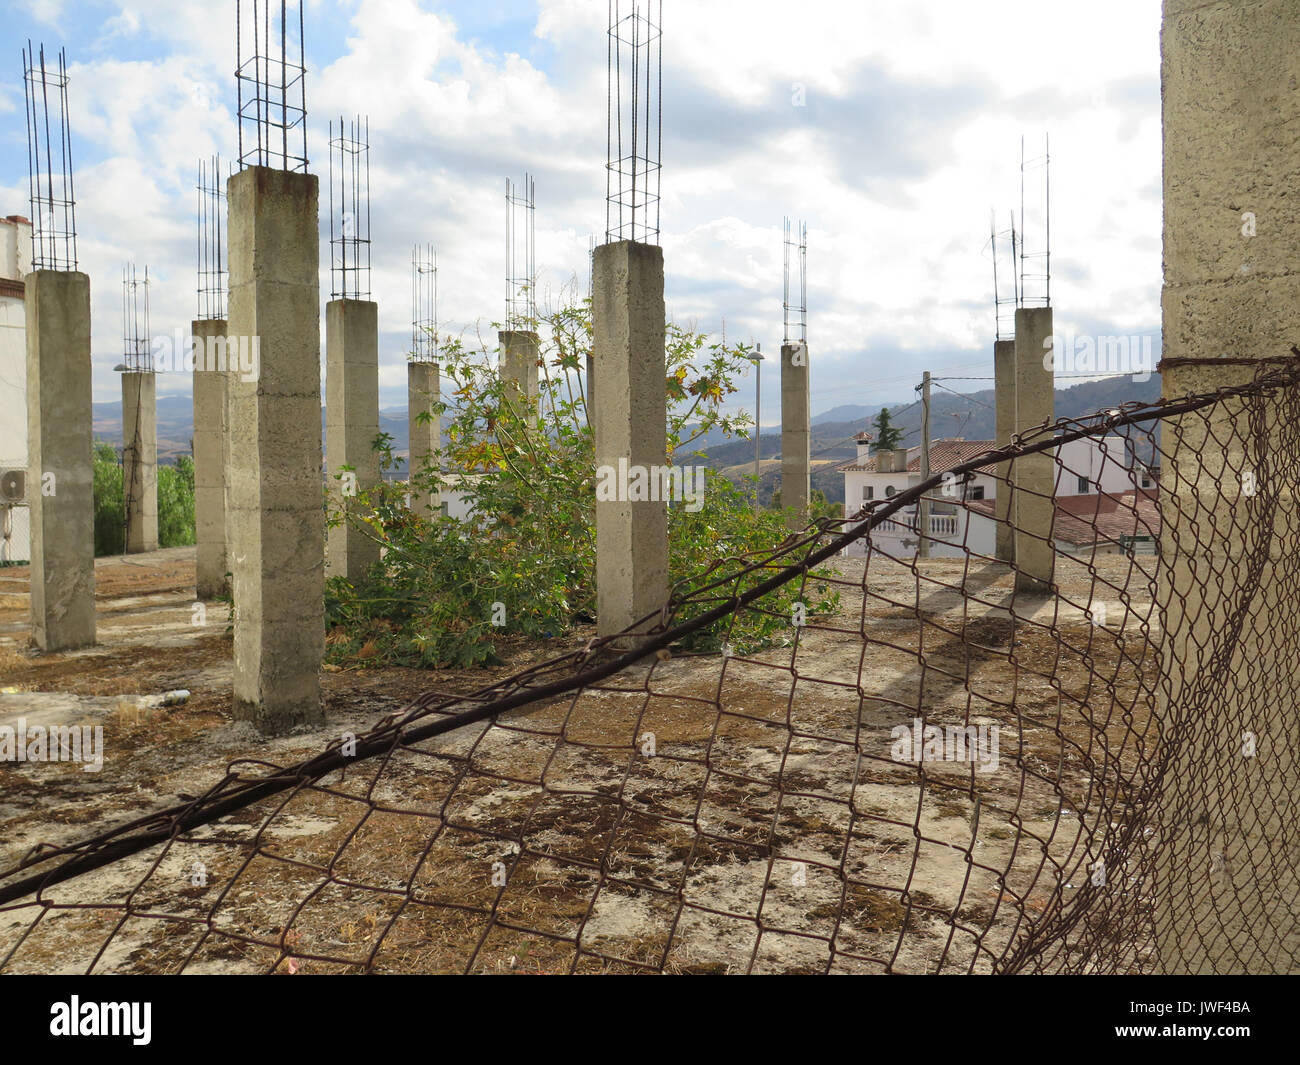 Abandoned building site with tall Reinforced concrete pillars behind rusty fence Stock Photo